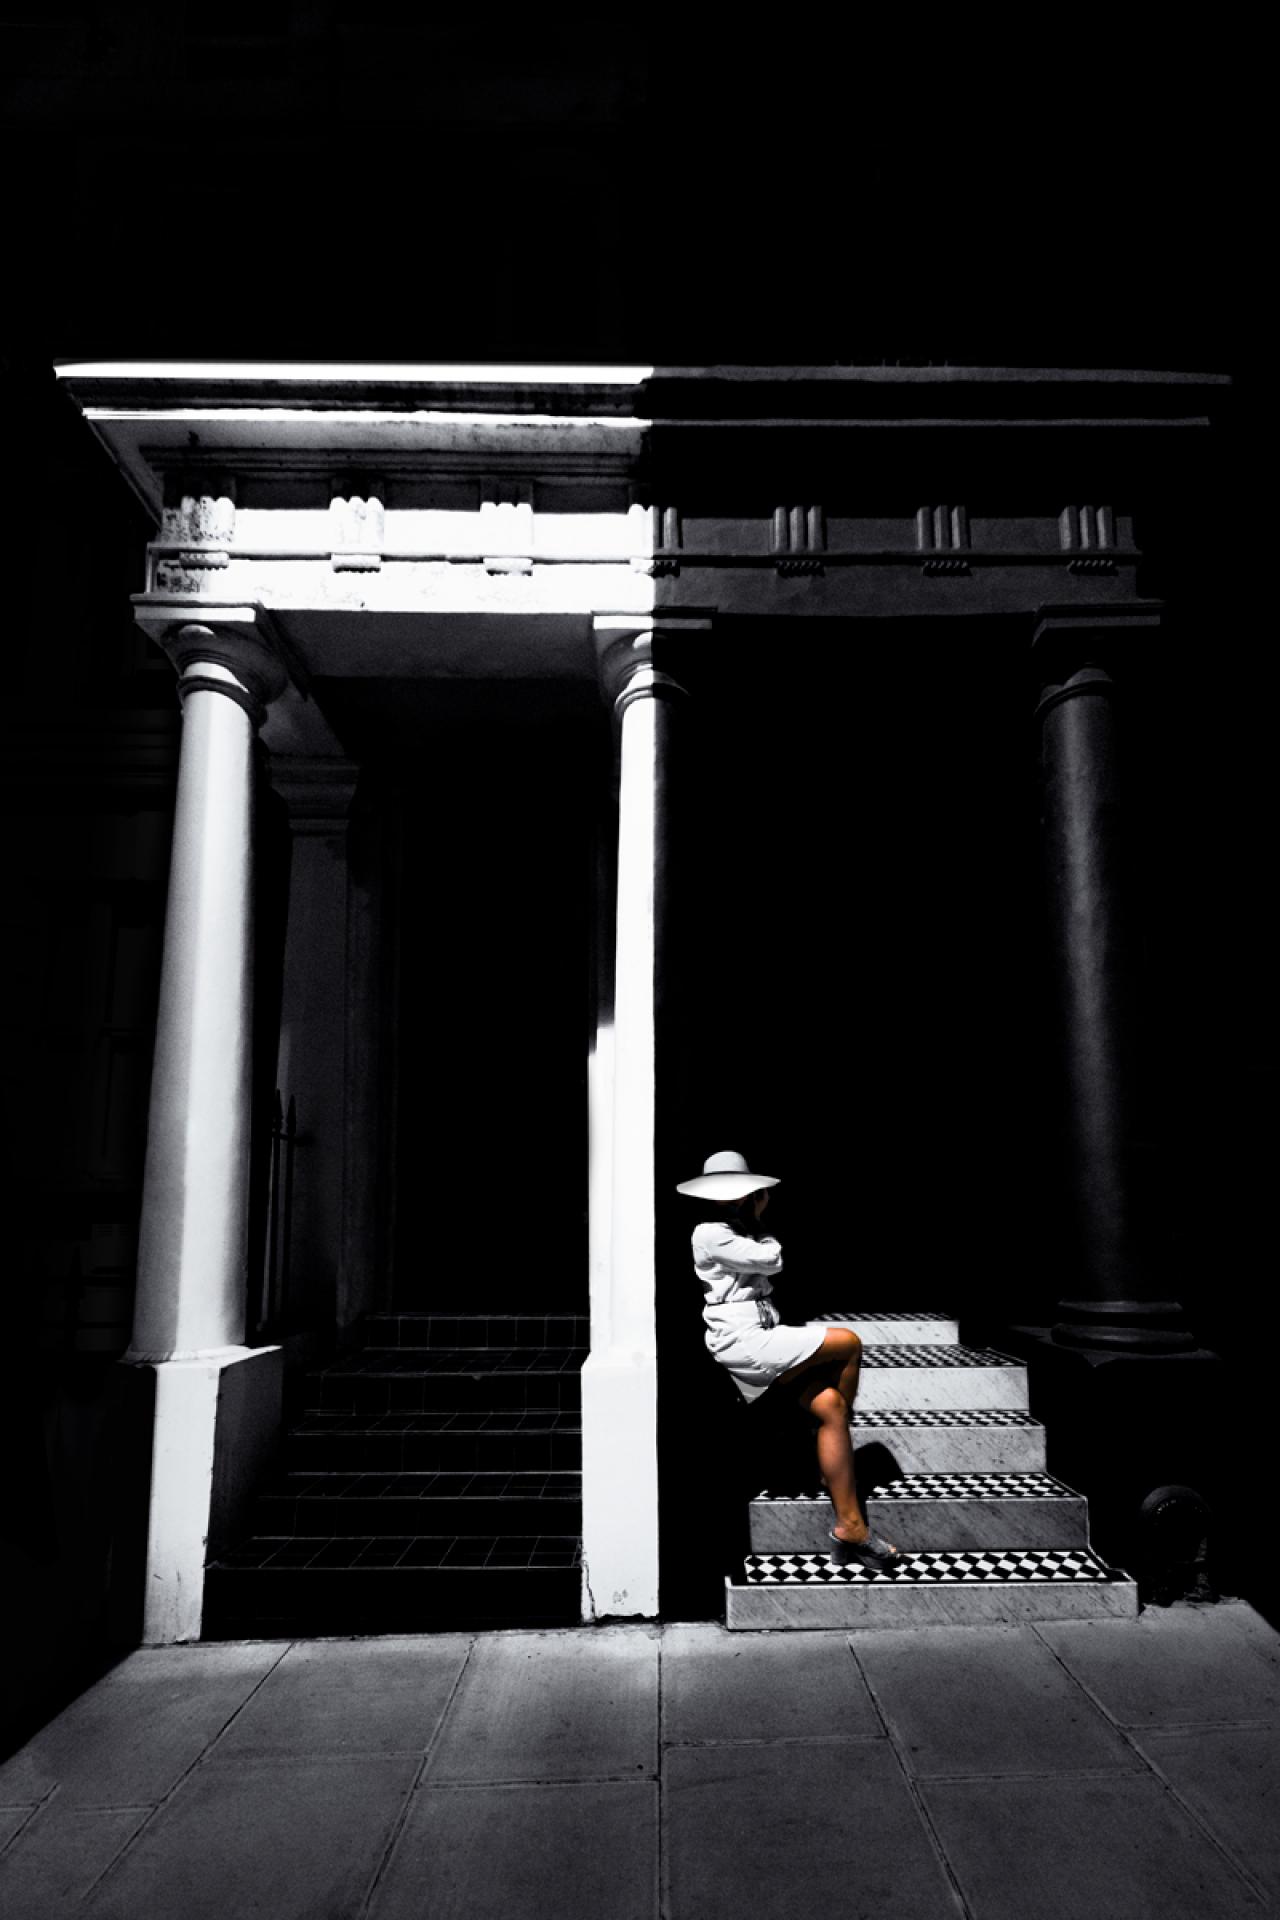 New York Photography Awards Winner - Lady in White